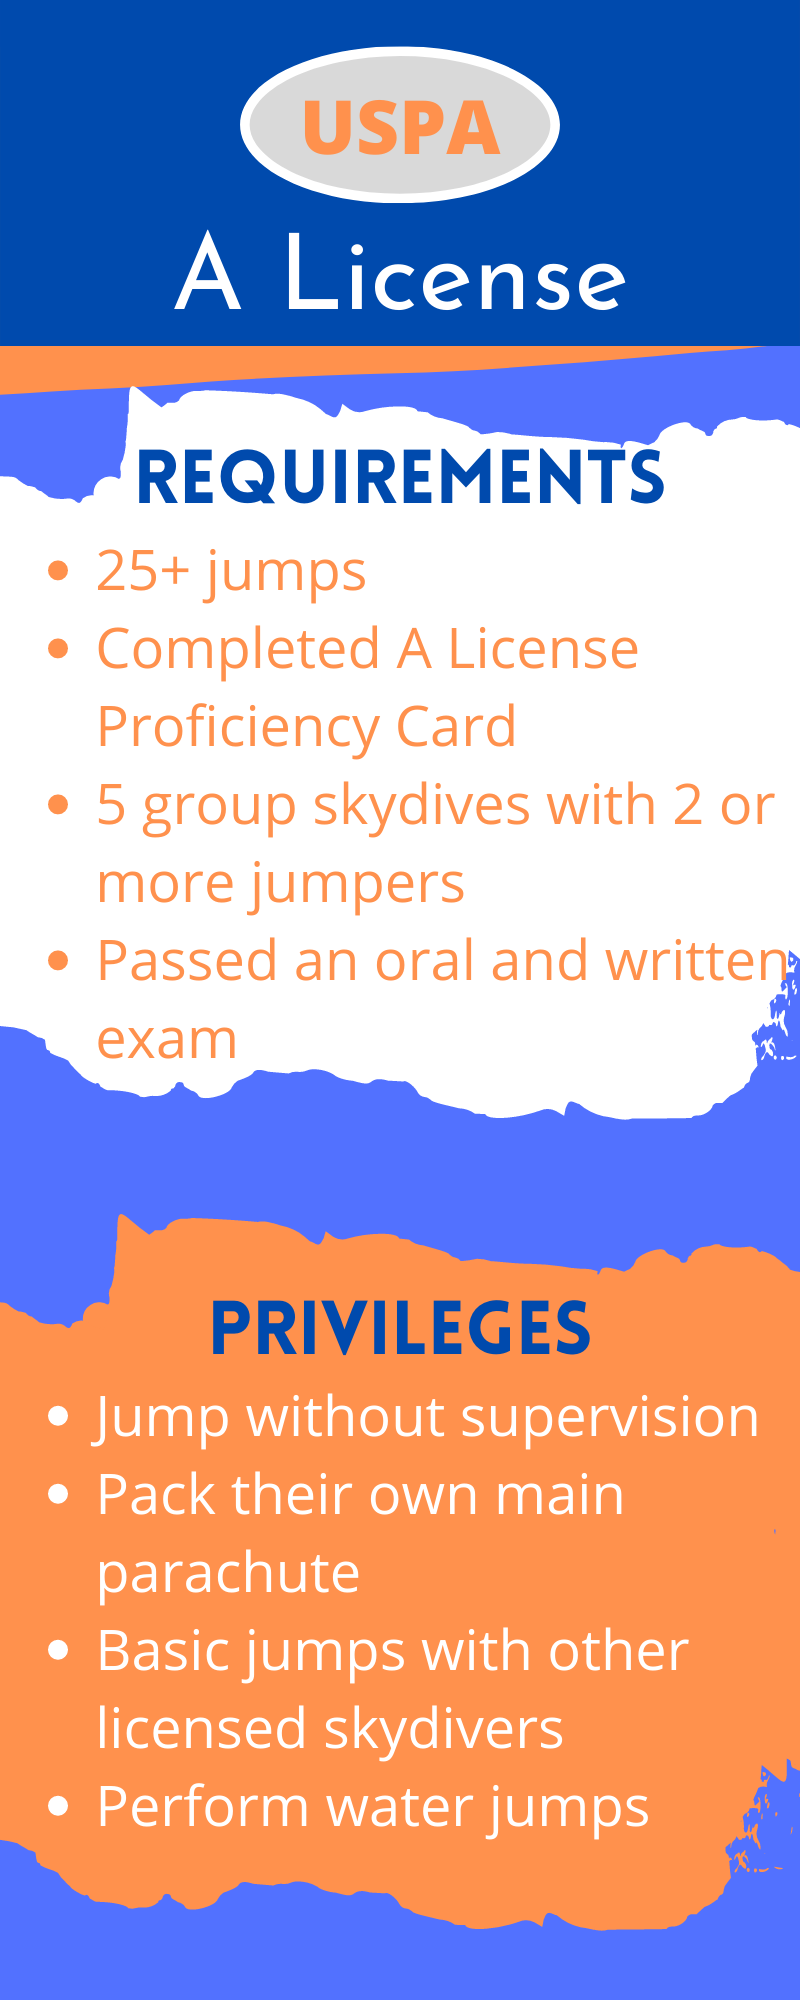 USPA A License Requirements and Privileges